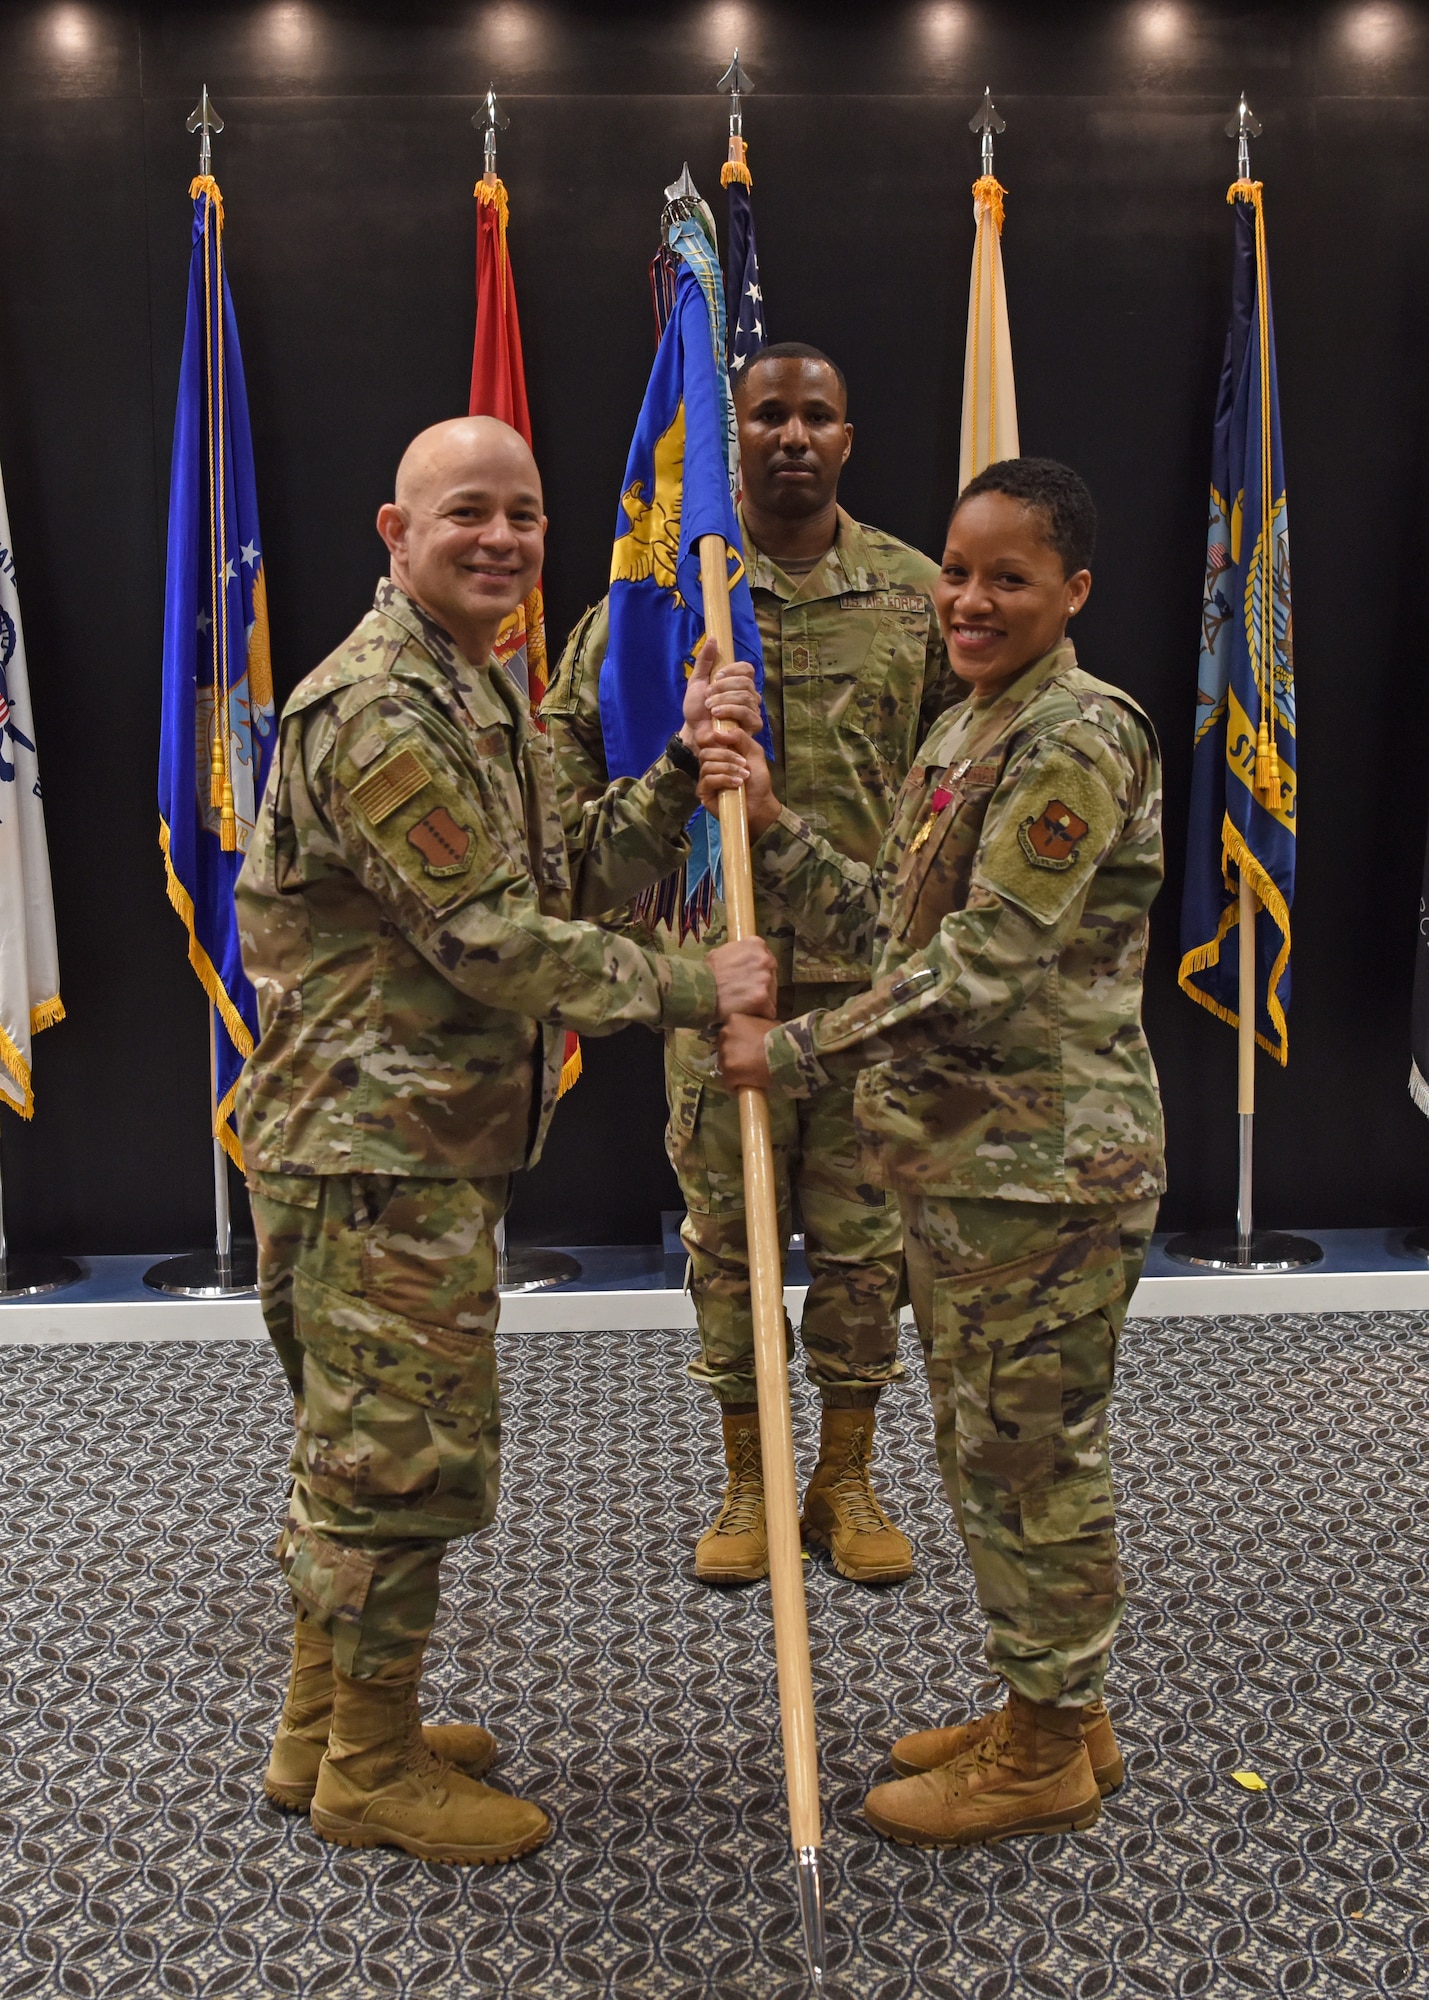 U.S. Air Force Col. Lauren Byrd, 17th Medical Group outgoing commander, passes the17th MDG guidon to Col. Andres Nazario, 17th Training Wing commander, during the change of command ceremony at the Event Center on Goodfellow Air Force Base, Texas, June 8, 2021. Byrd led over 200 military, civilian and contract employees to serve thousands of beneficiaries and students in healthcare missions during her two years of service at Goodfellow. (U.S. Air Force photo by Senior Airman Abbey Rieves)